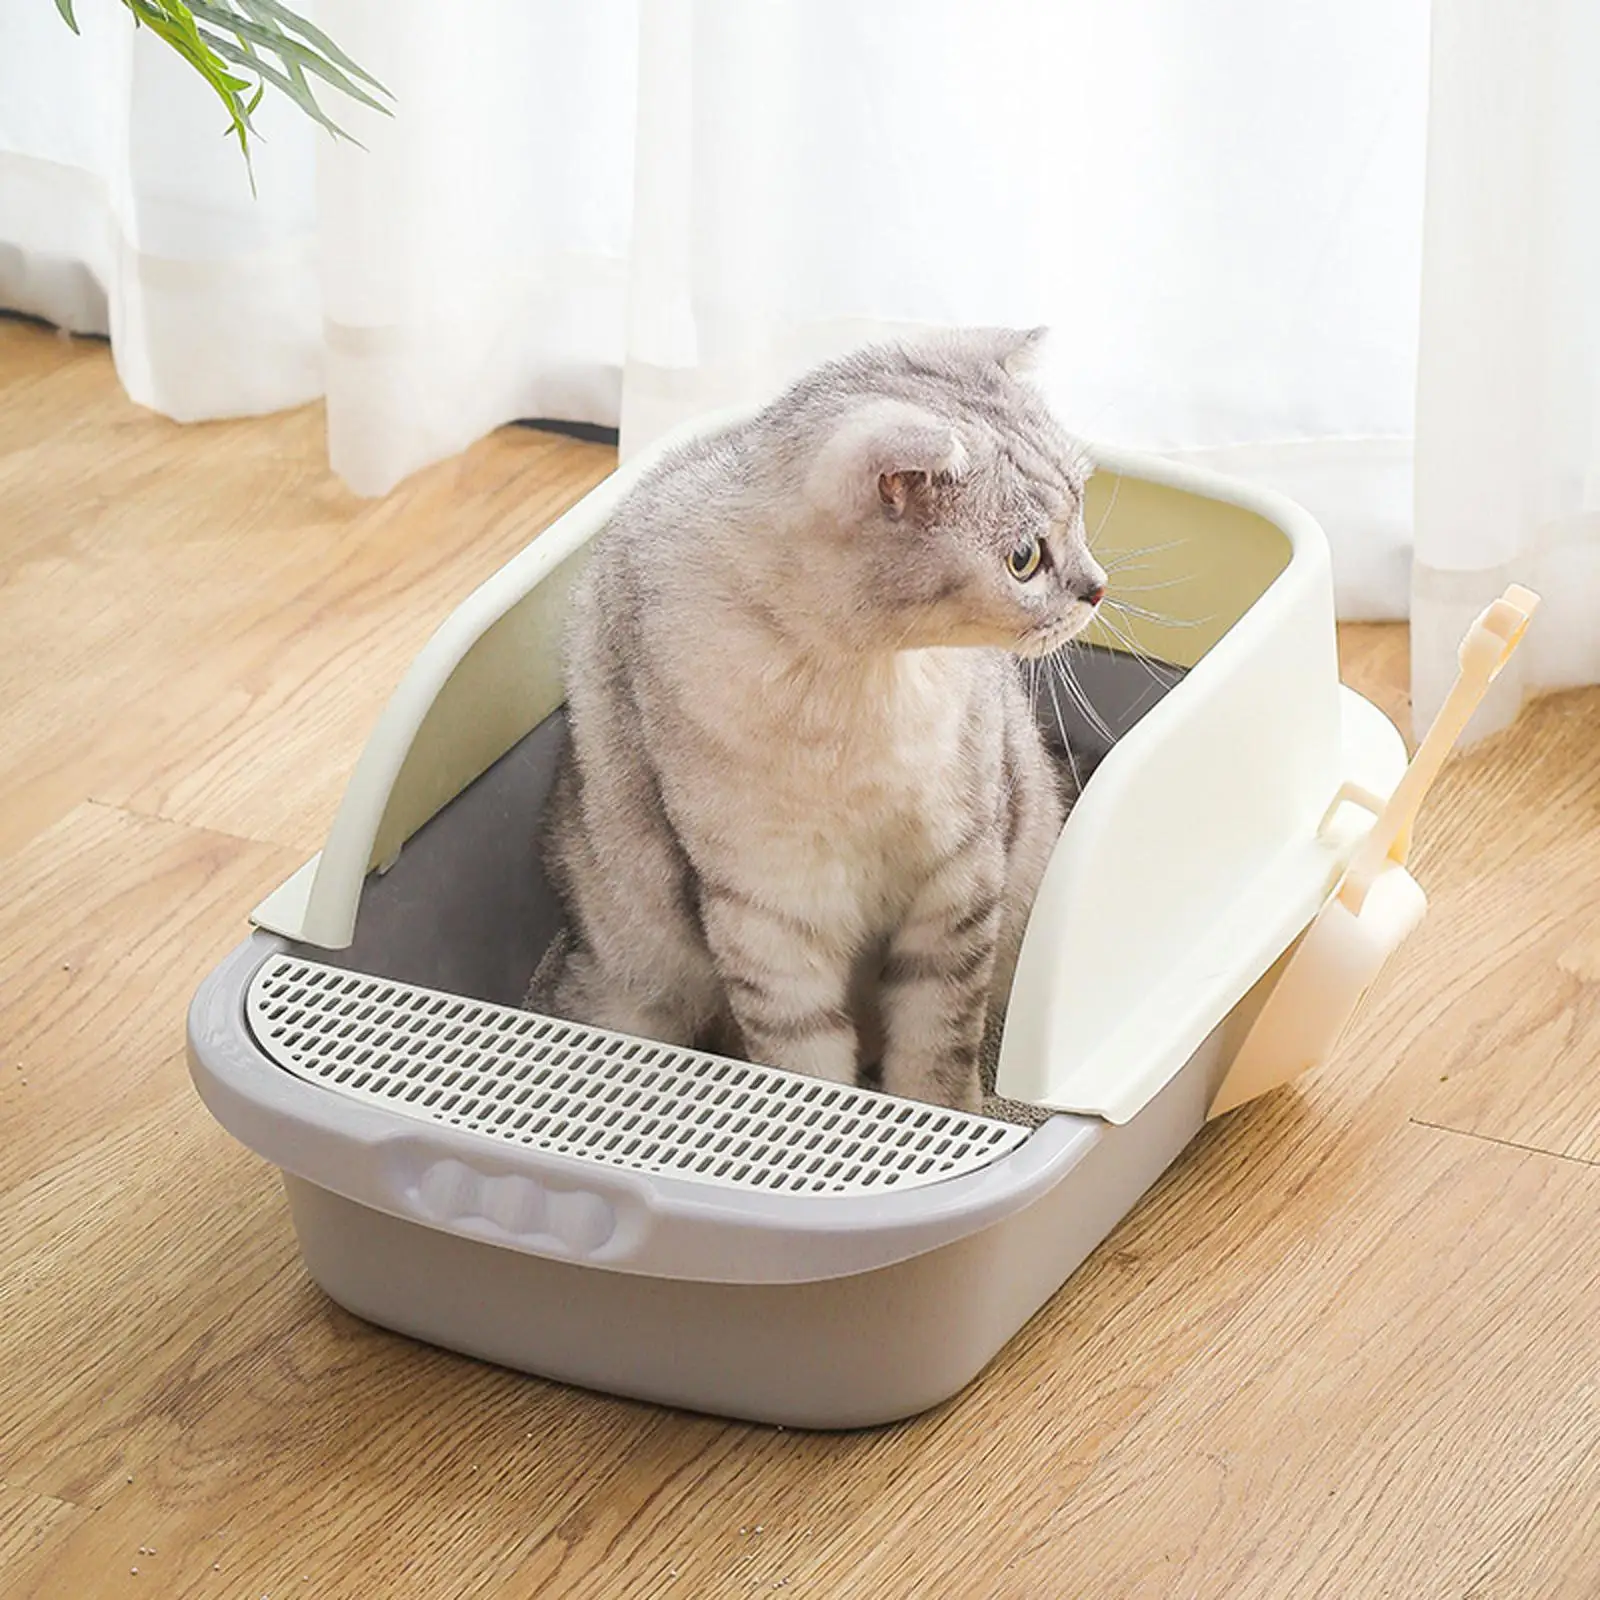 Toilet High Sided Rim Portable Bedpan Dog Tray Cat Litter Box for Small Animals Travel